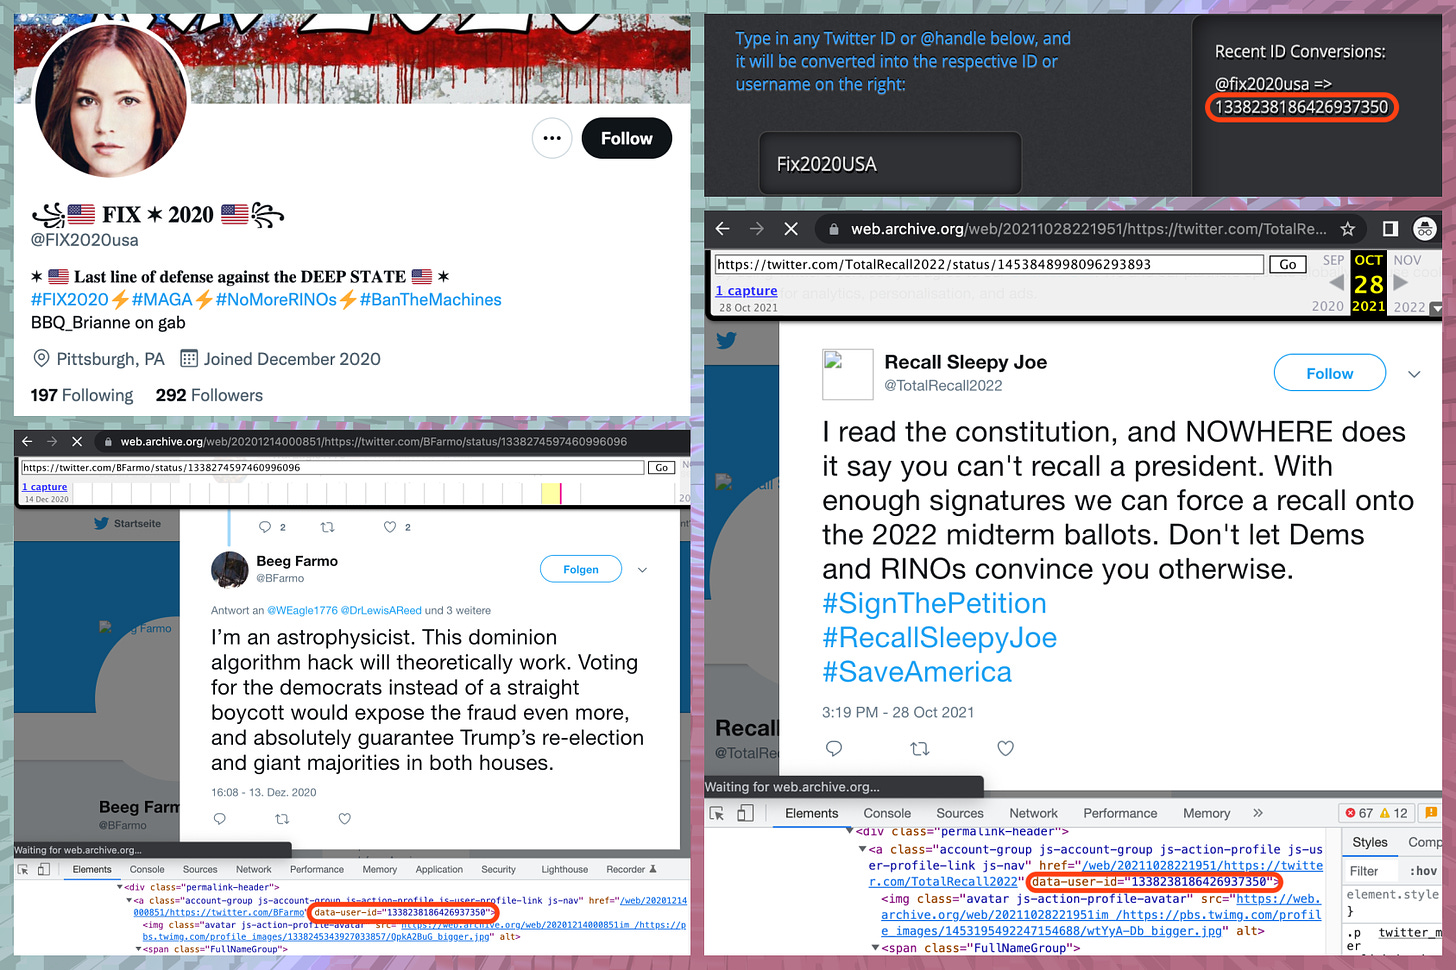 collage of Wayback Machine screenshots demonstrating that the account with the permanent ID 1338238186426937350 (presently named @FIX2020usa) was previously named @/BFarmo and @/TotalRecall2022